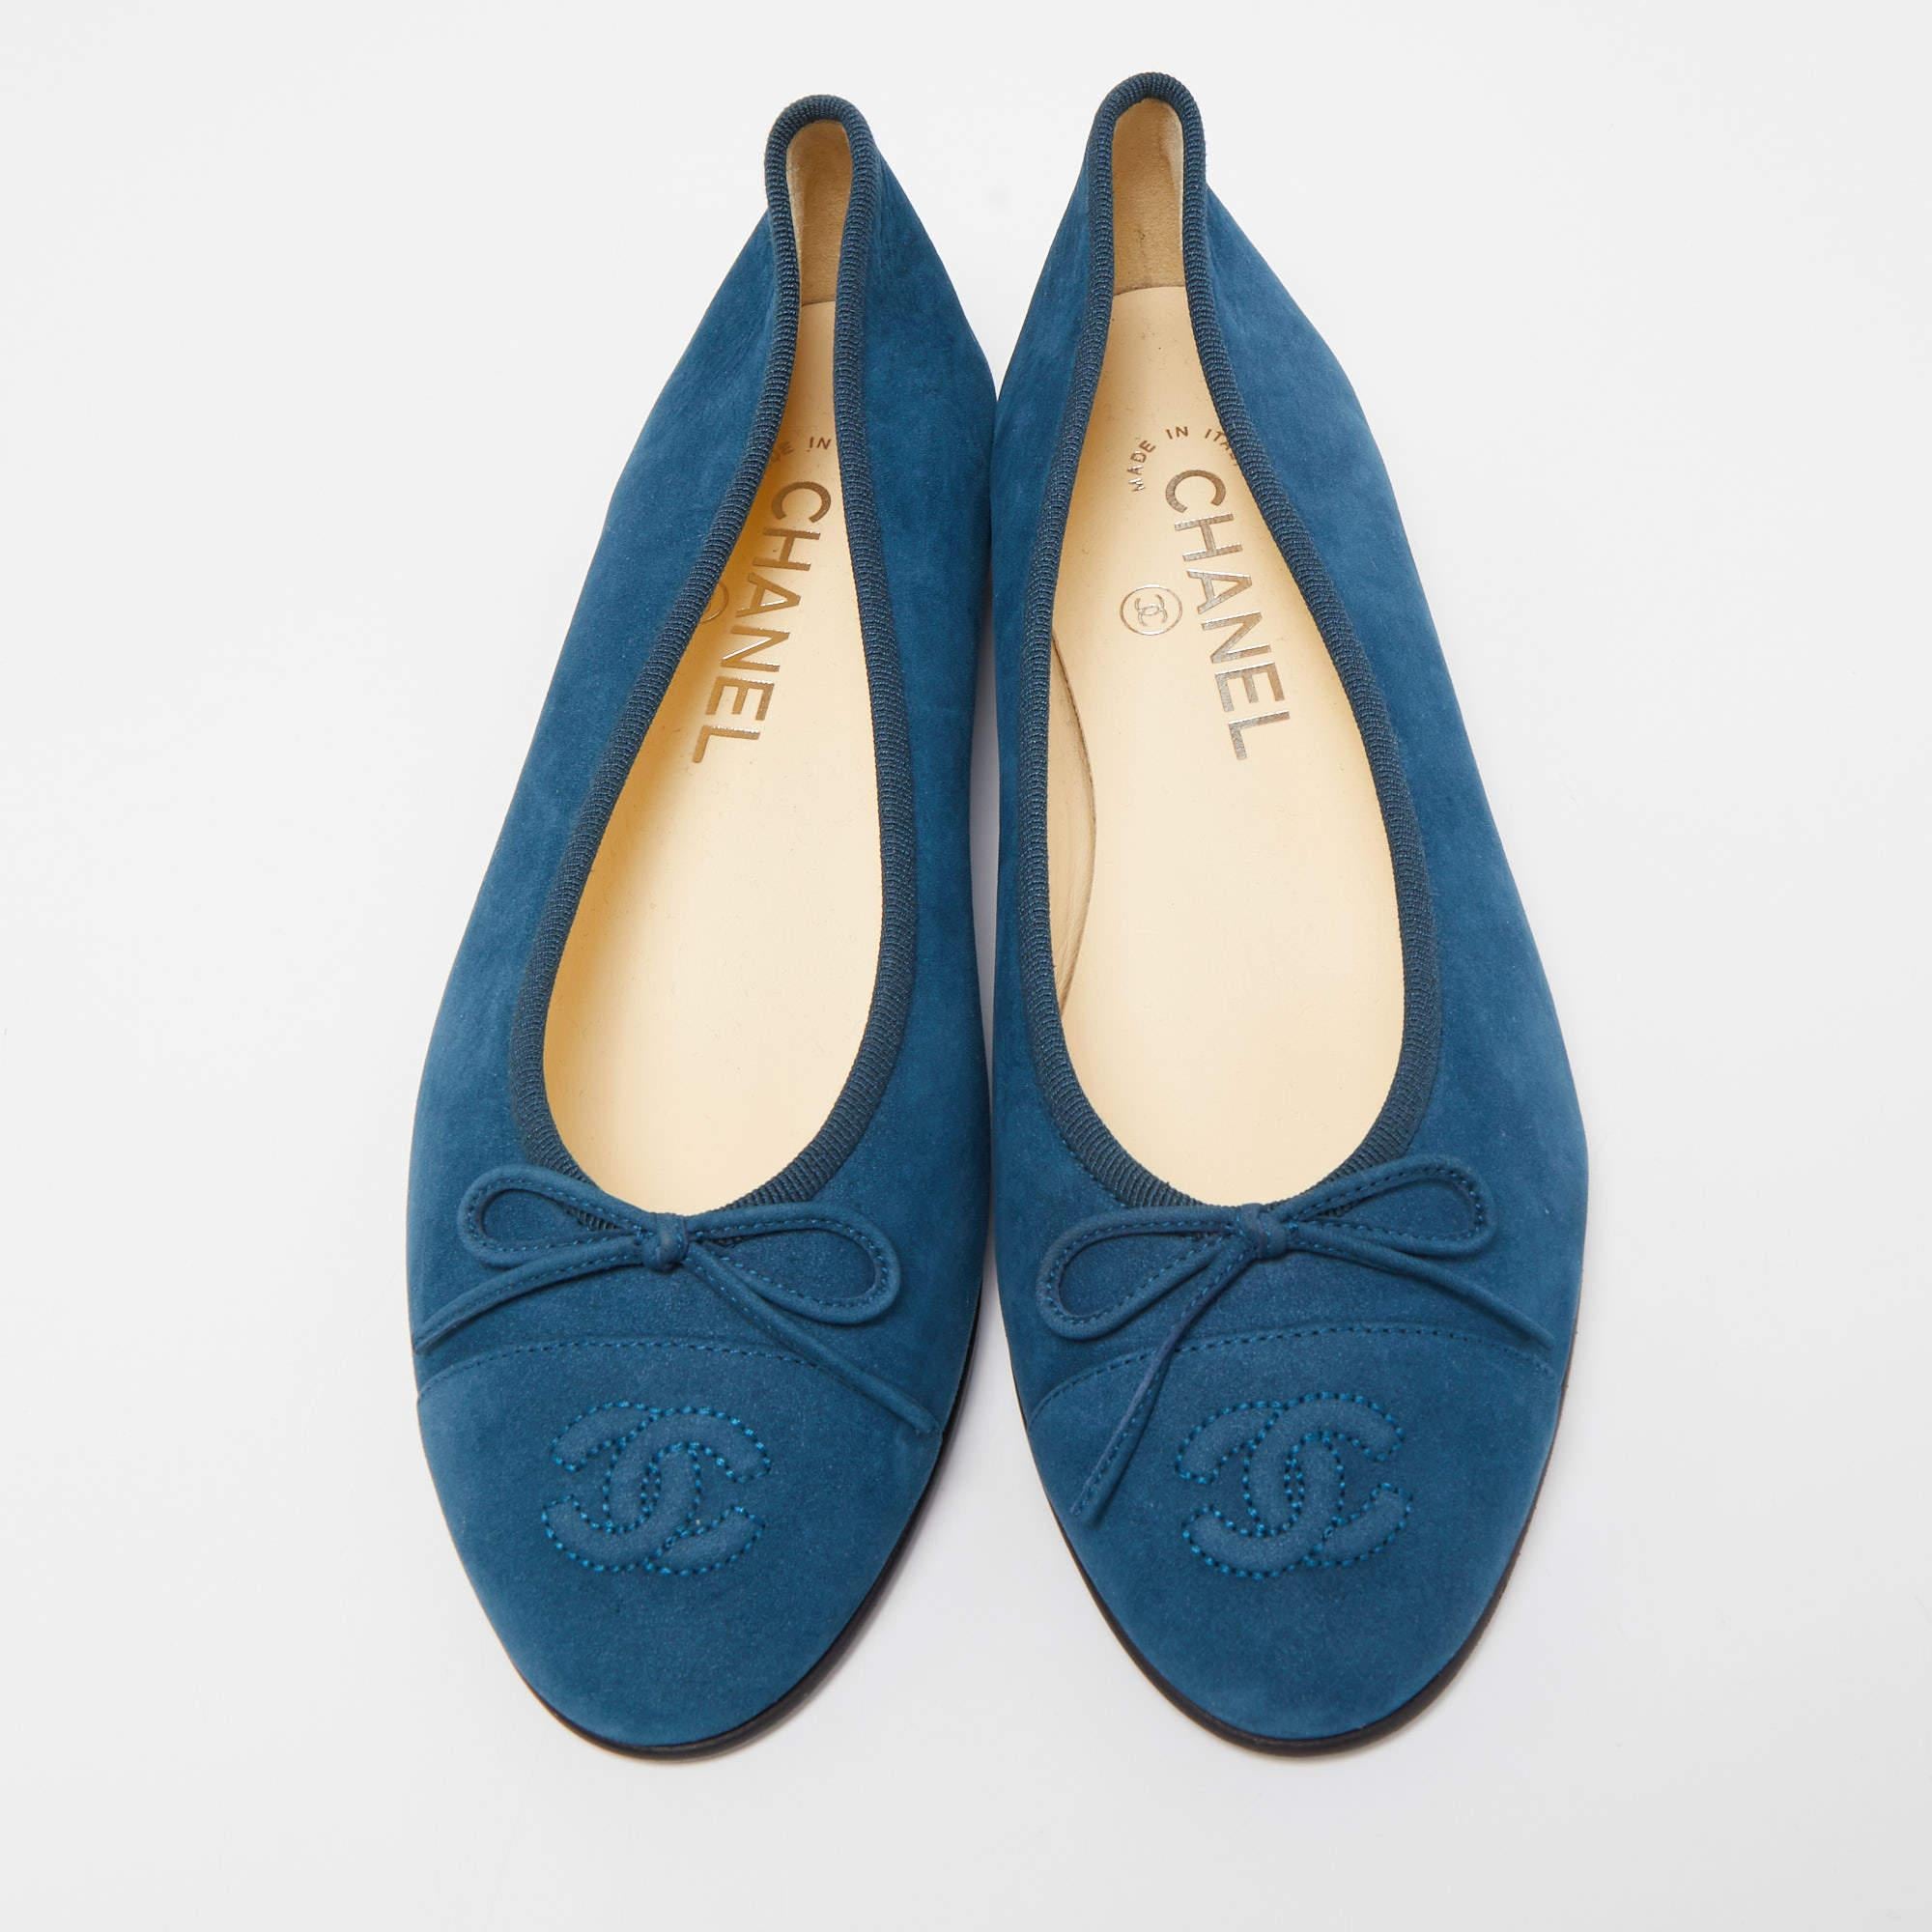 Defined by comfort and effortless style, no wardrobe is ever complete without a pair of Chanel CC ballet flats. This pair is lovely to look at and is equipped with elements like a comfortable insole and a durable sole.

Includes: Original Dustbag,